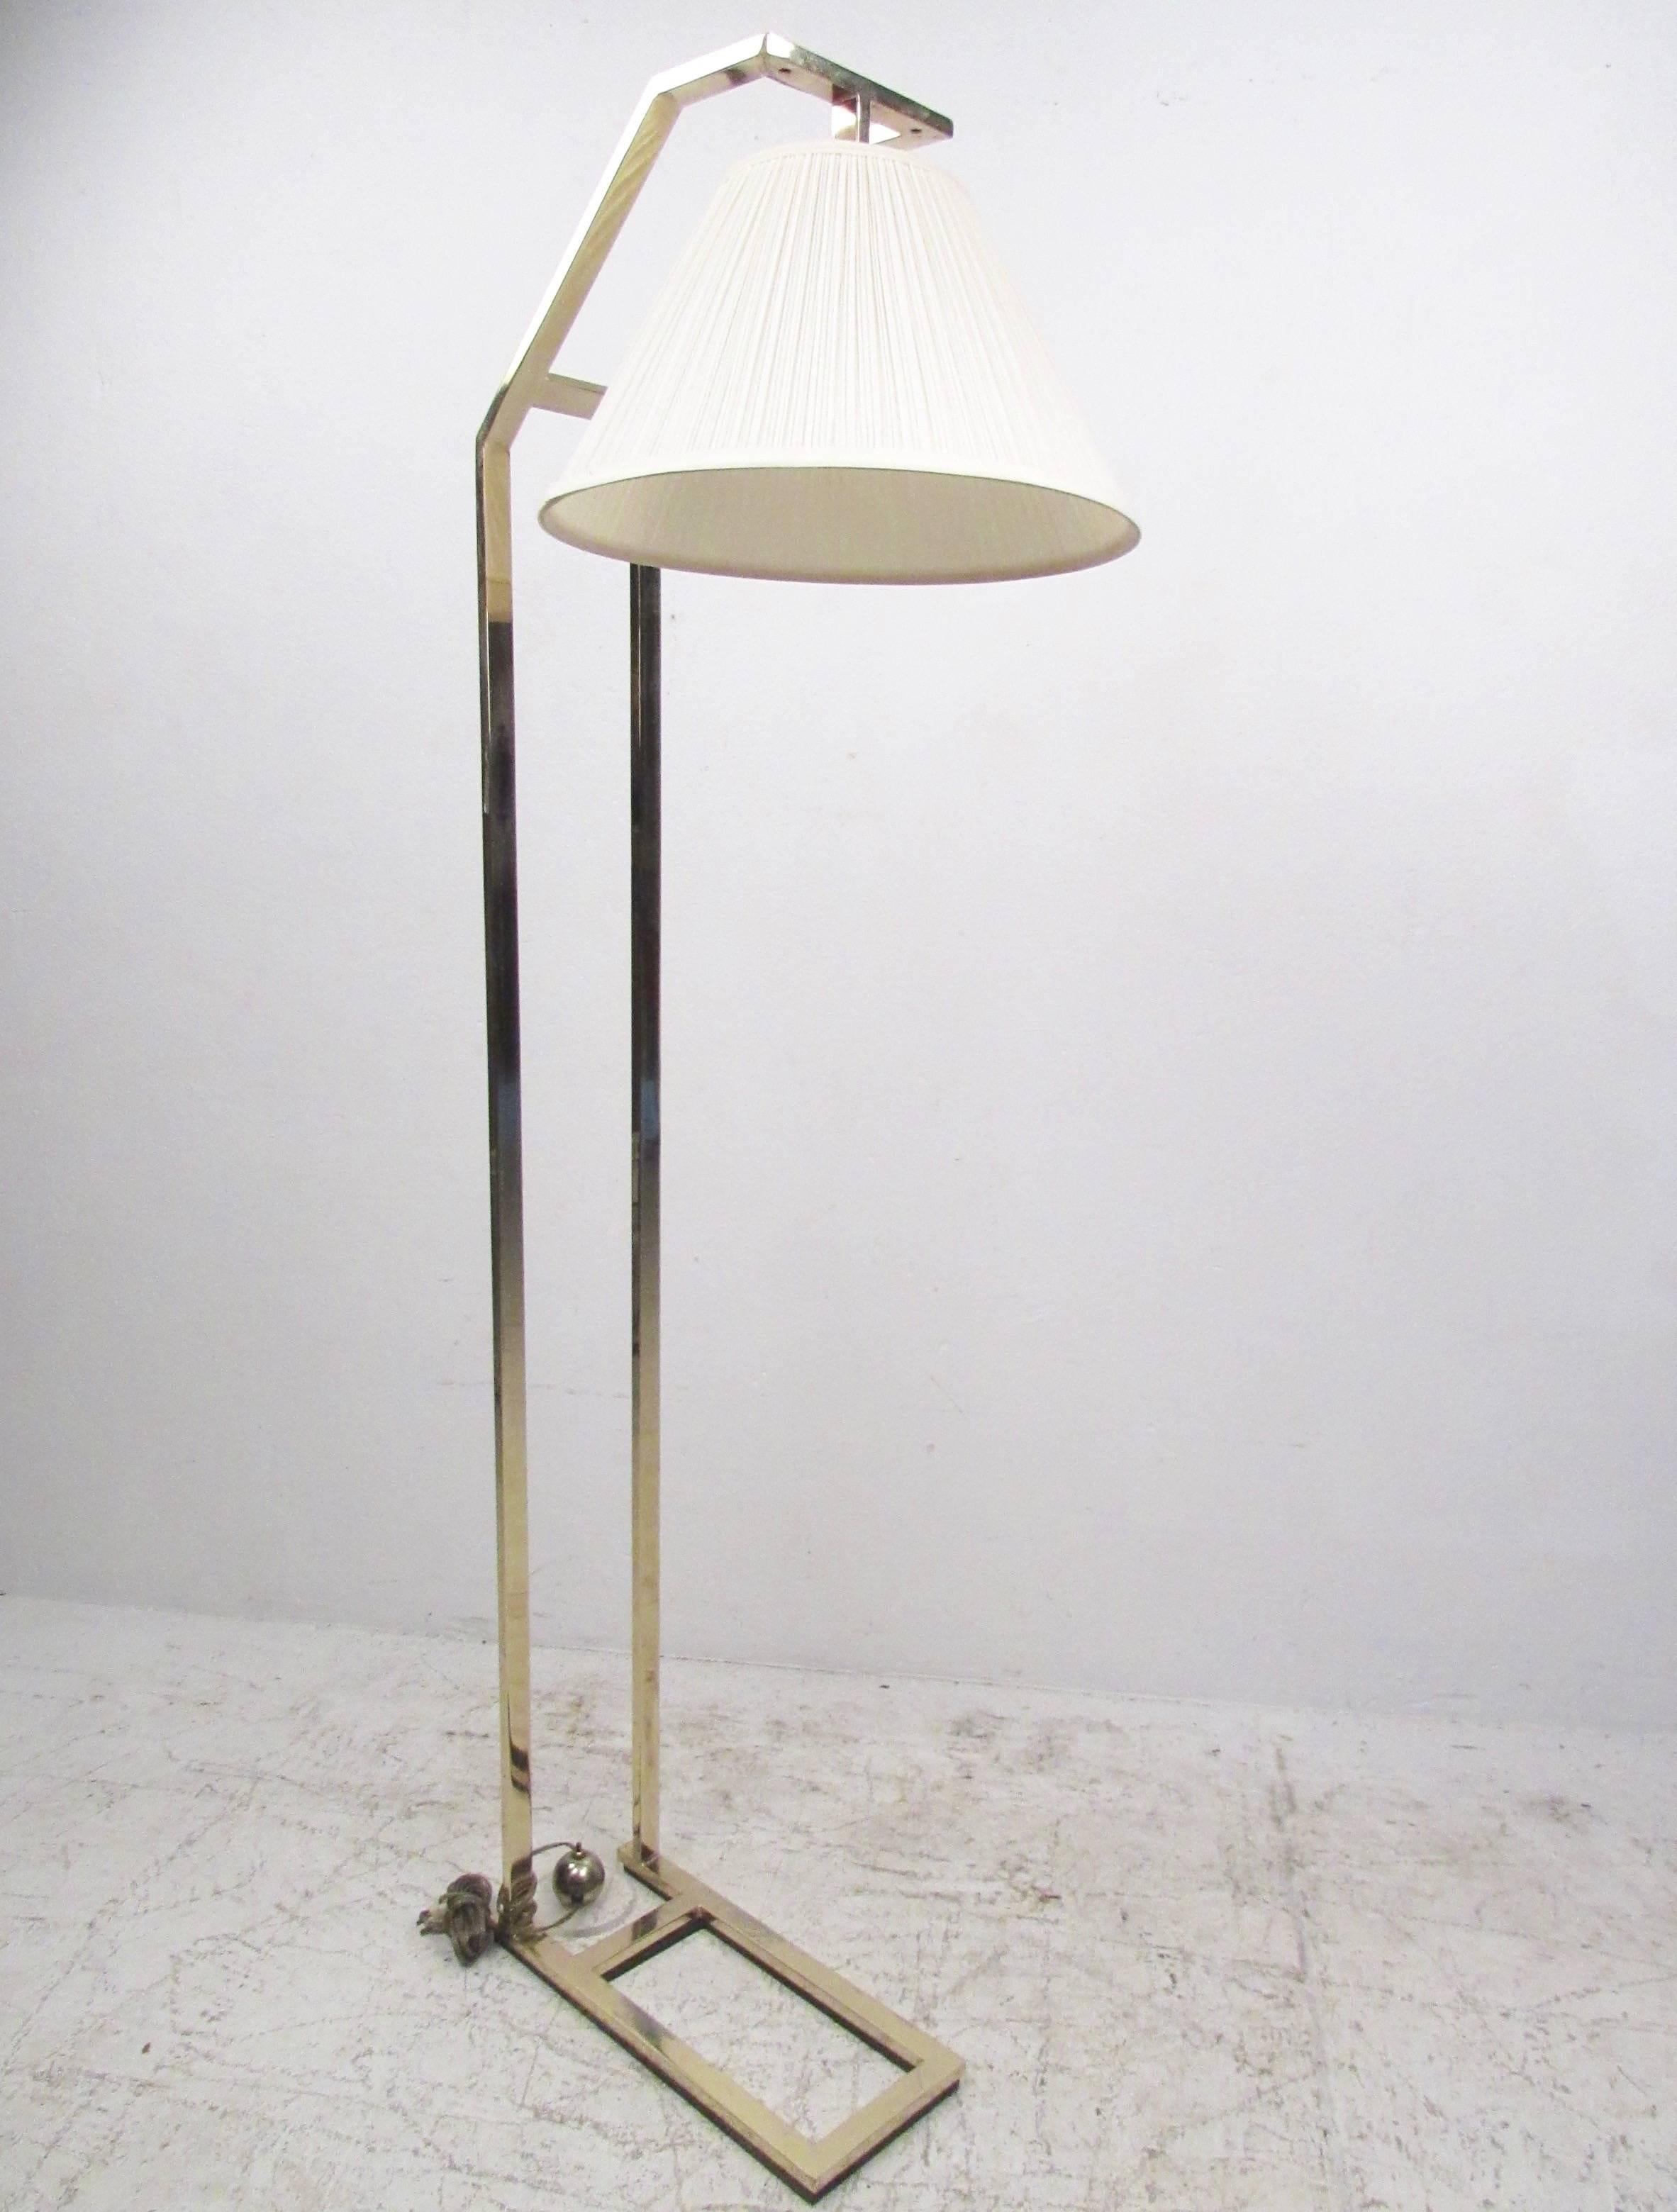 This contemporary modern cantilever style floor lamp features simplistic yet elegant design, with a stylish bend making it an ideal reading lamp for any modernistic seating area. Brass finish and wide fabric shade add to the appeal of this unique